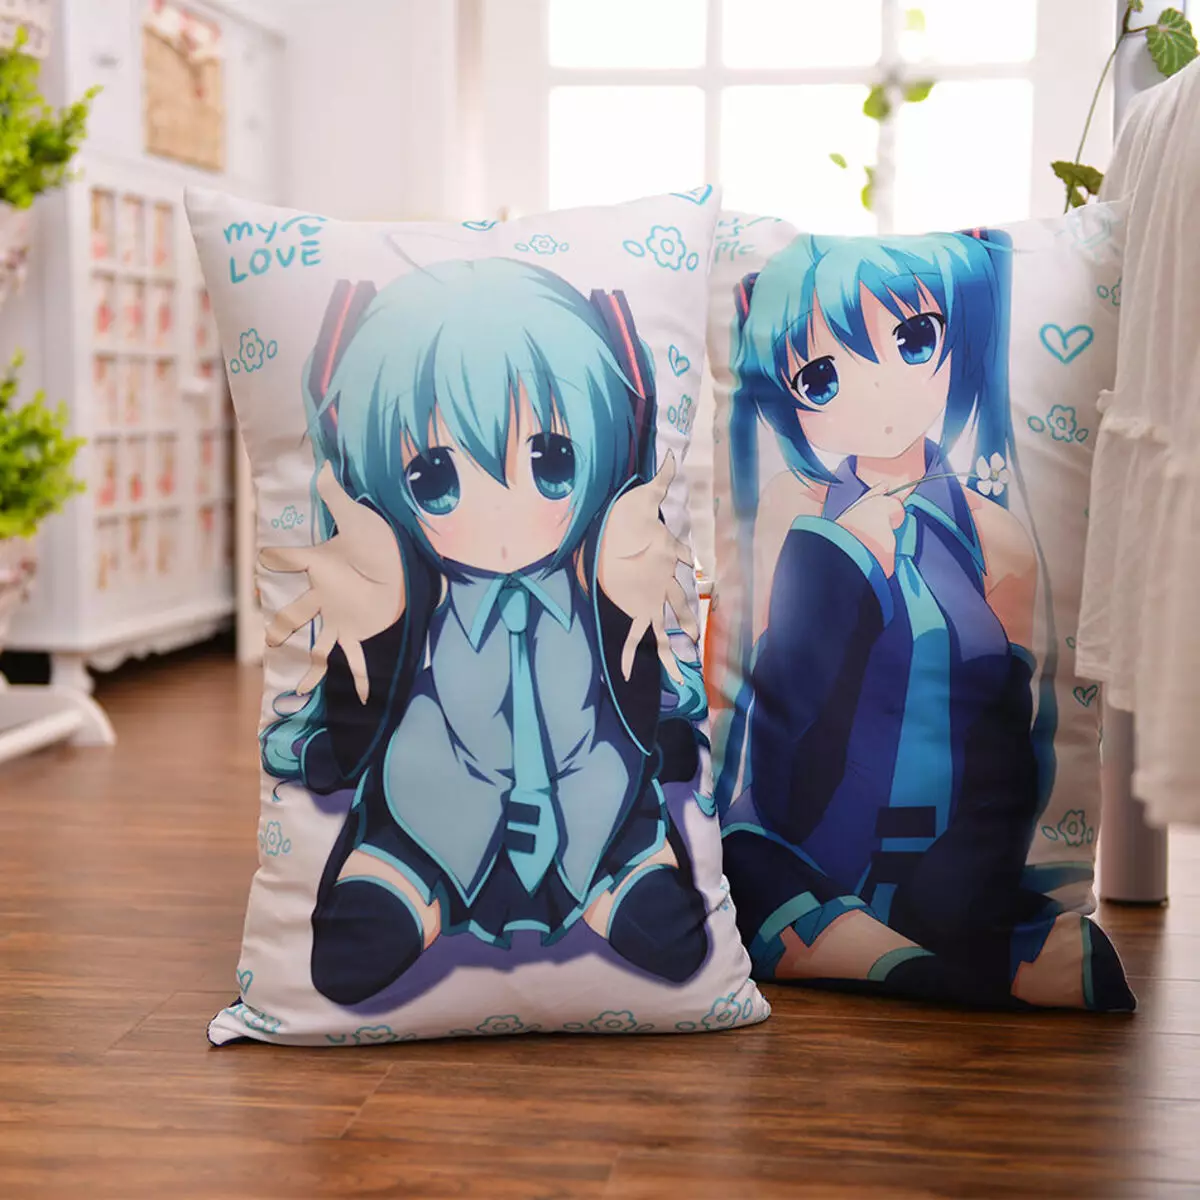 Anime-pillows: Dakimakur hug in full length, long big pillows with a print of girls and other characters 20757_23